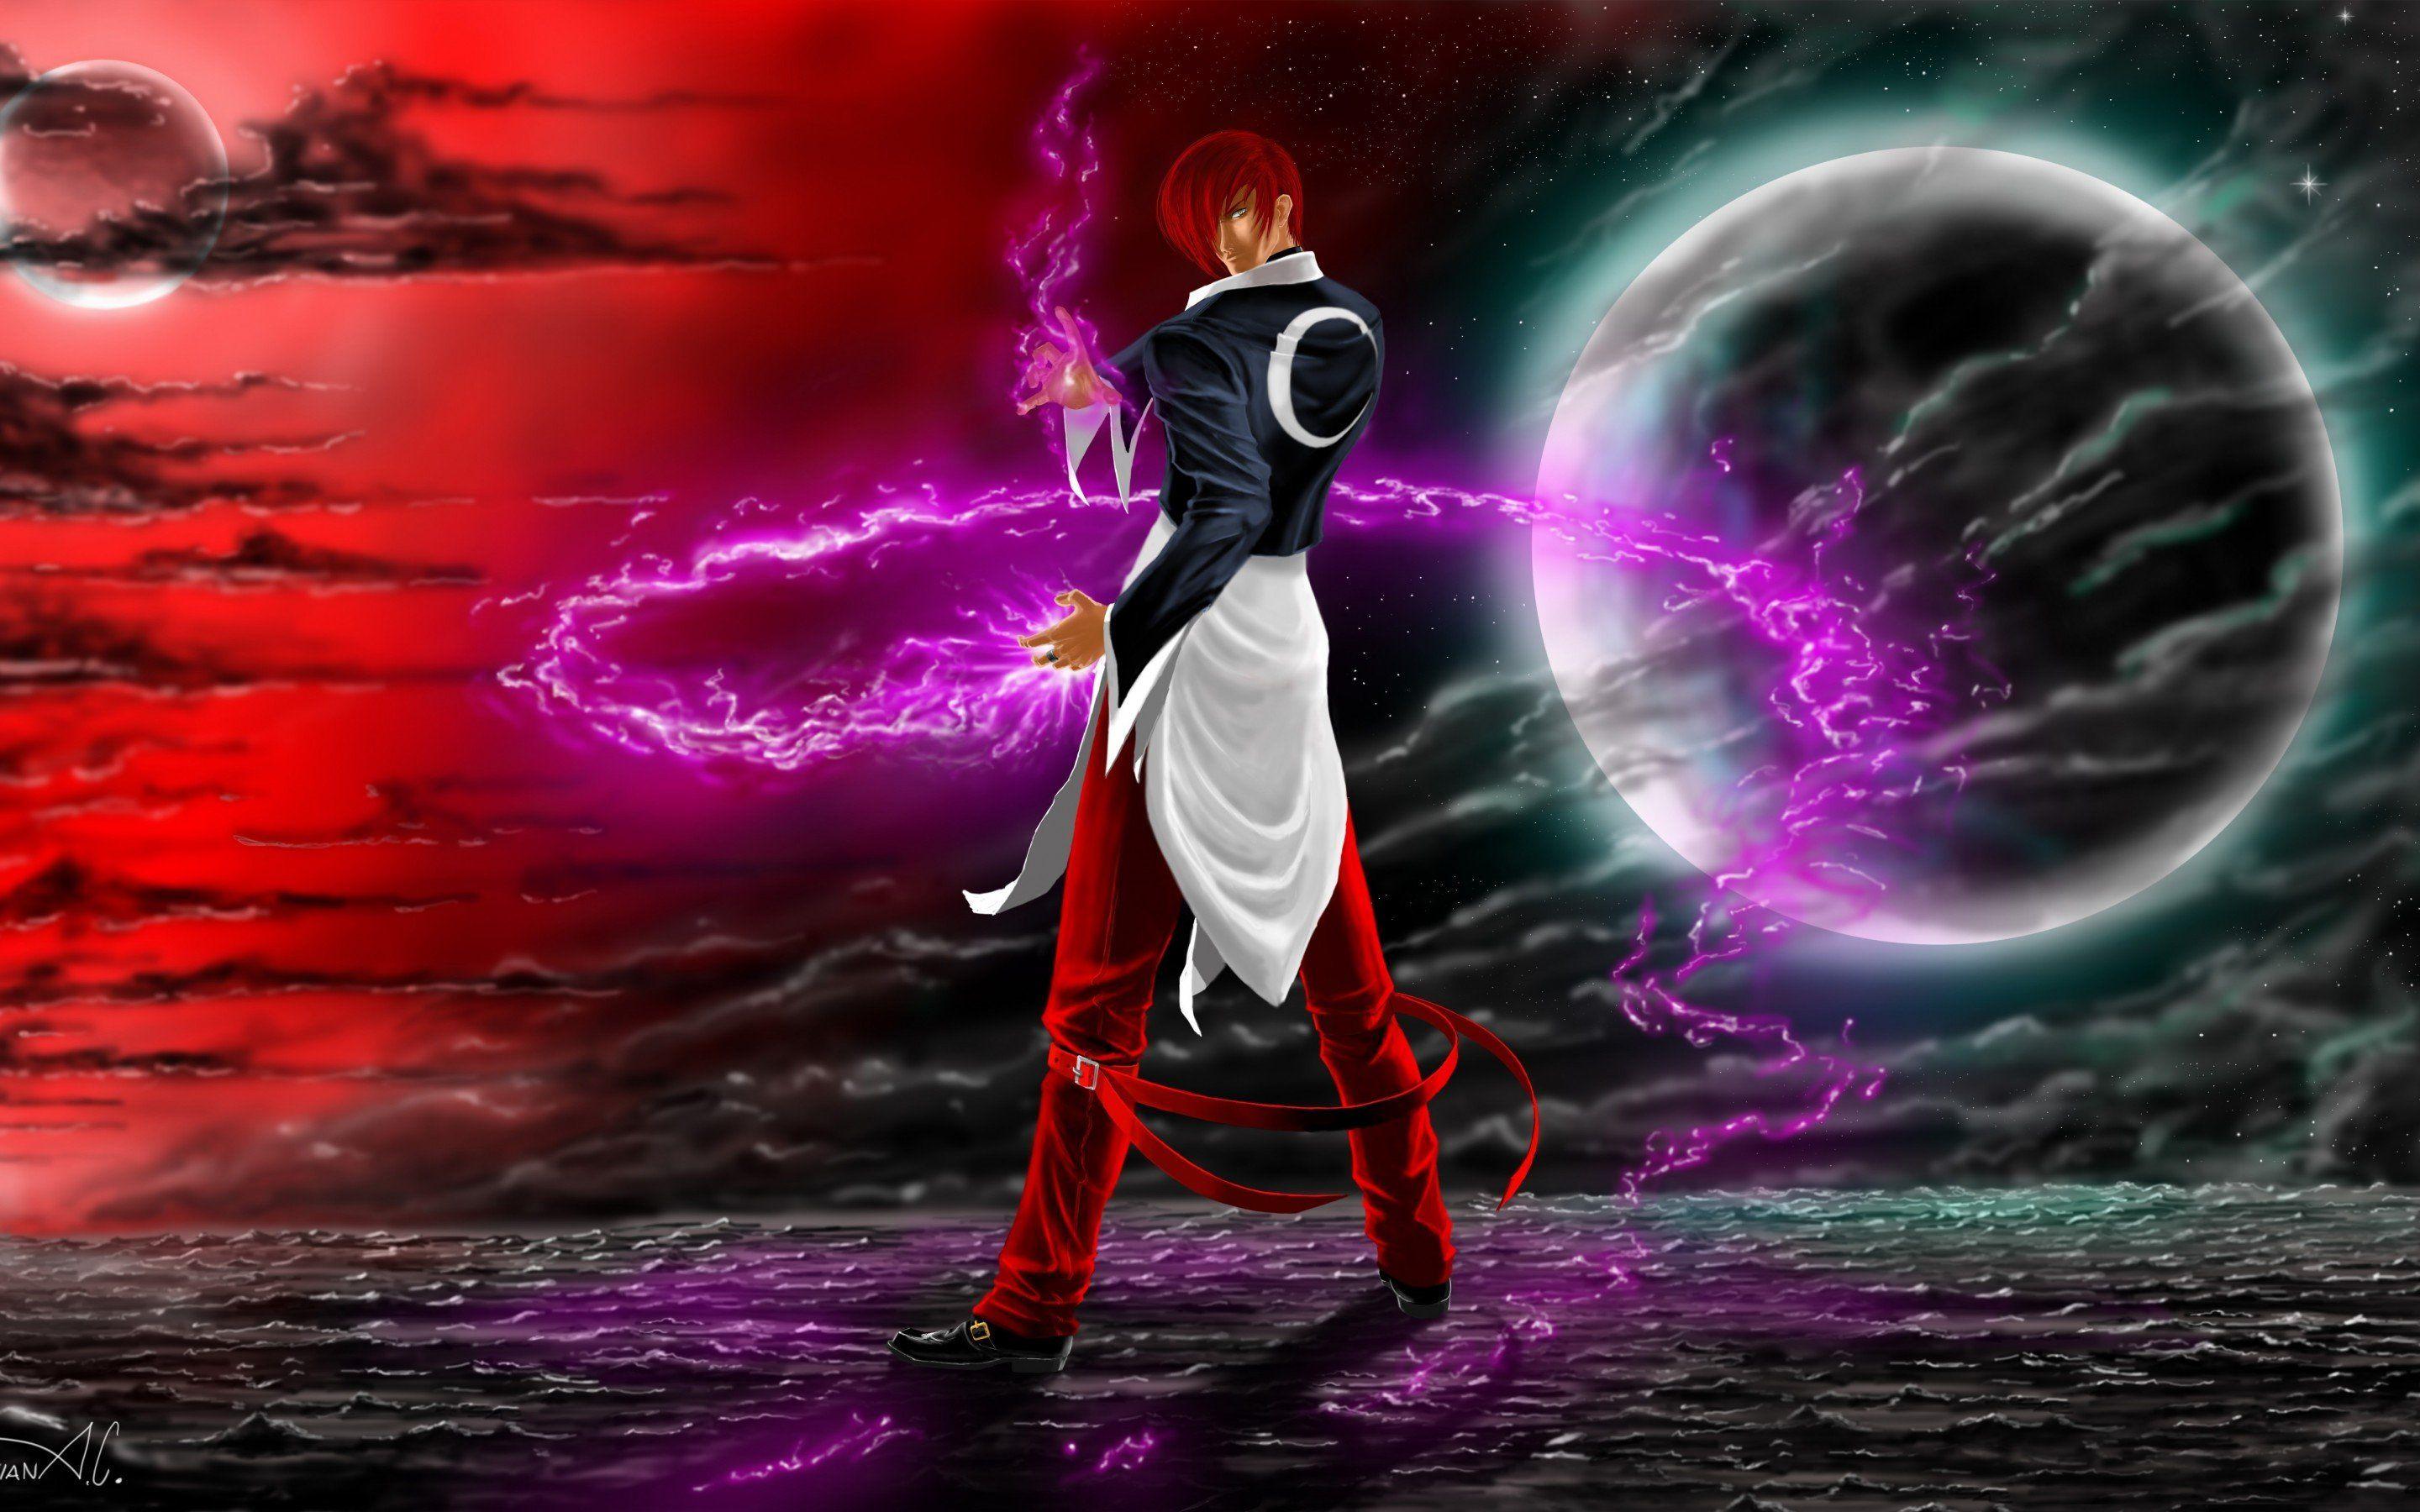 King Of Fighters Iori Yagami Wallpapers For Iphone - IMAGESEE